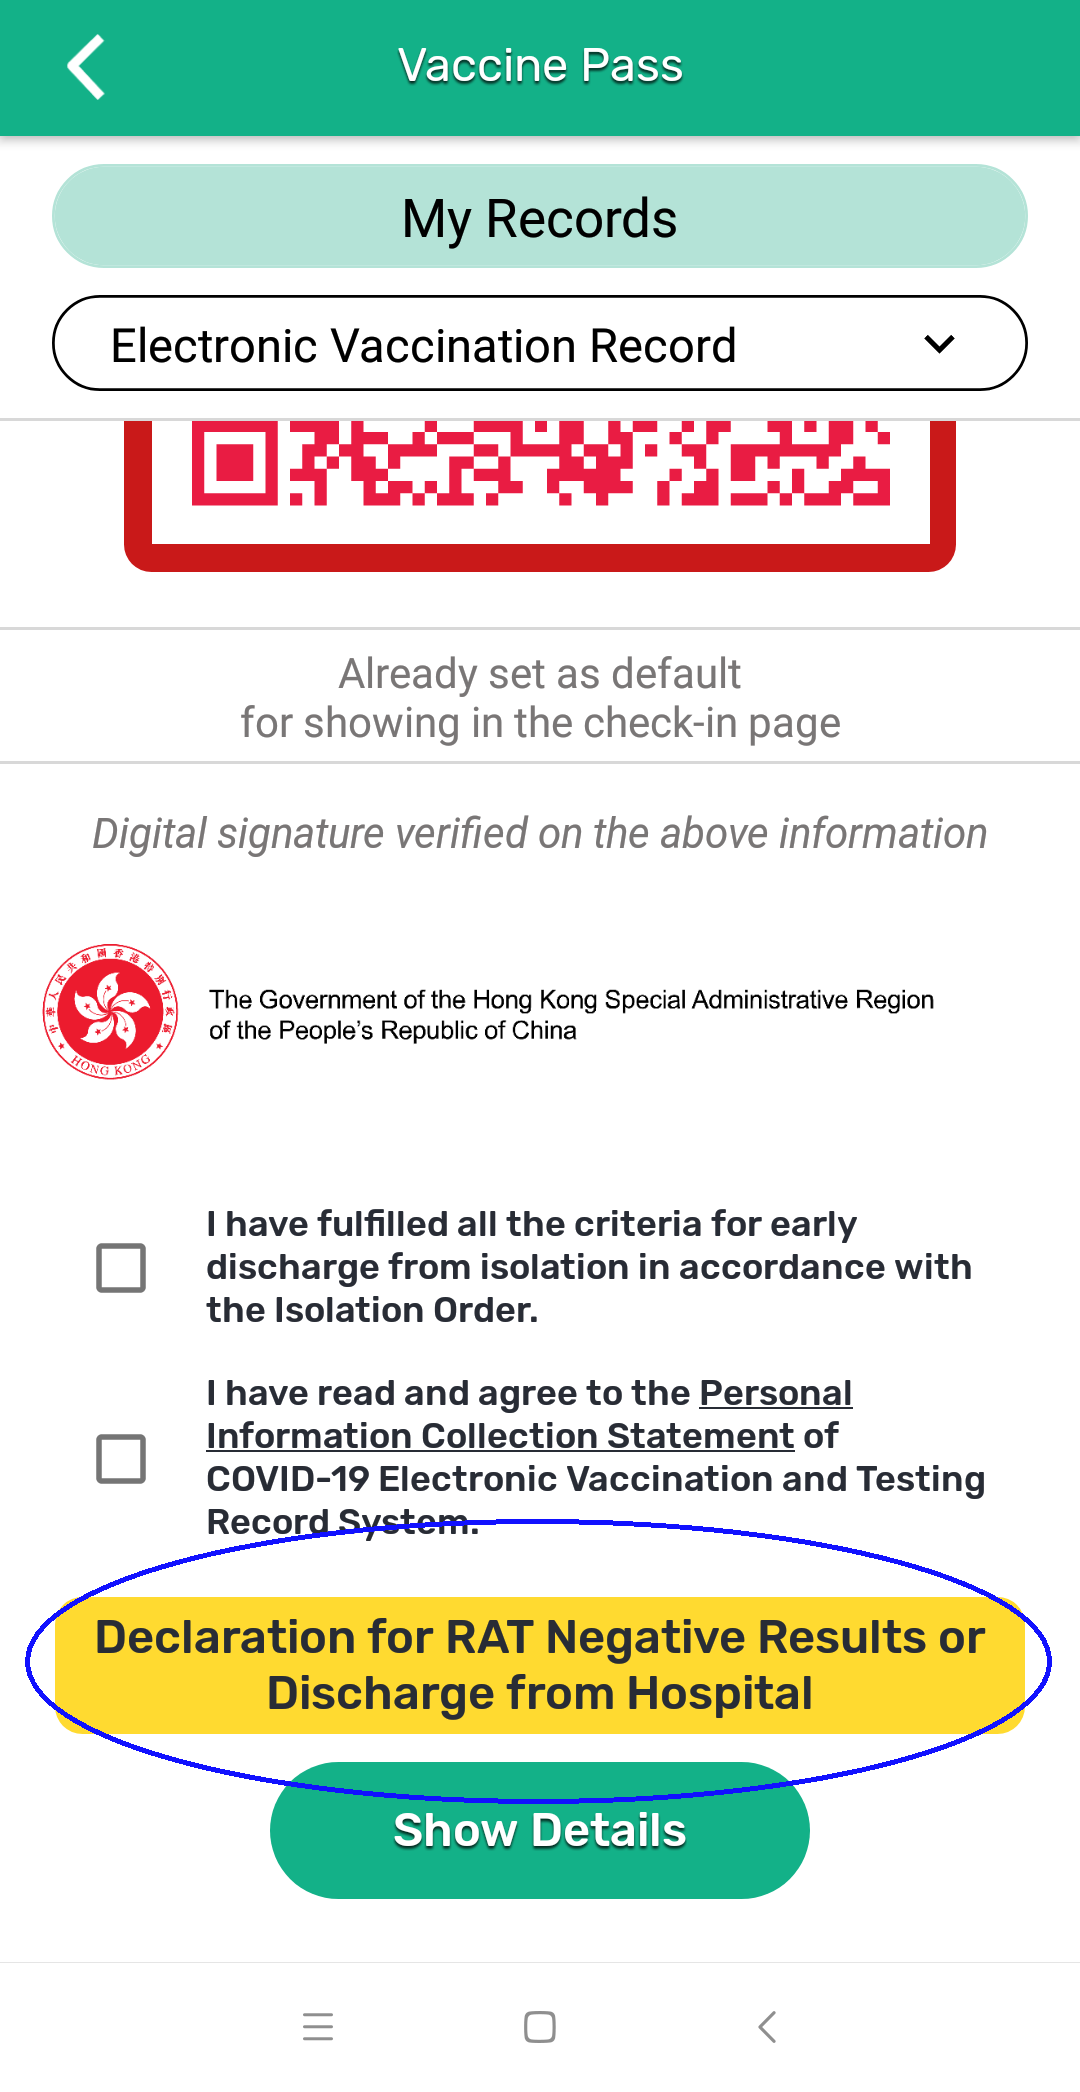 A new "Declaration for RAT Negative Results or Discharge from Hospital" button has been added to the "LeaveHomeSafe" mobile app today (October 31), allowing users infected with COVID-19 to complete isolation early on Day 7 or onwards by just one click in the mobile app.